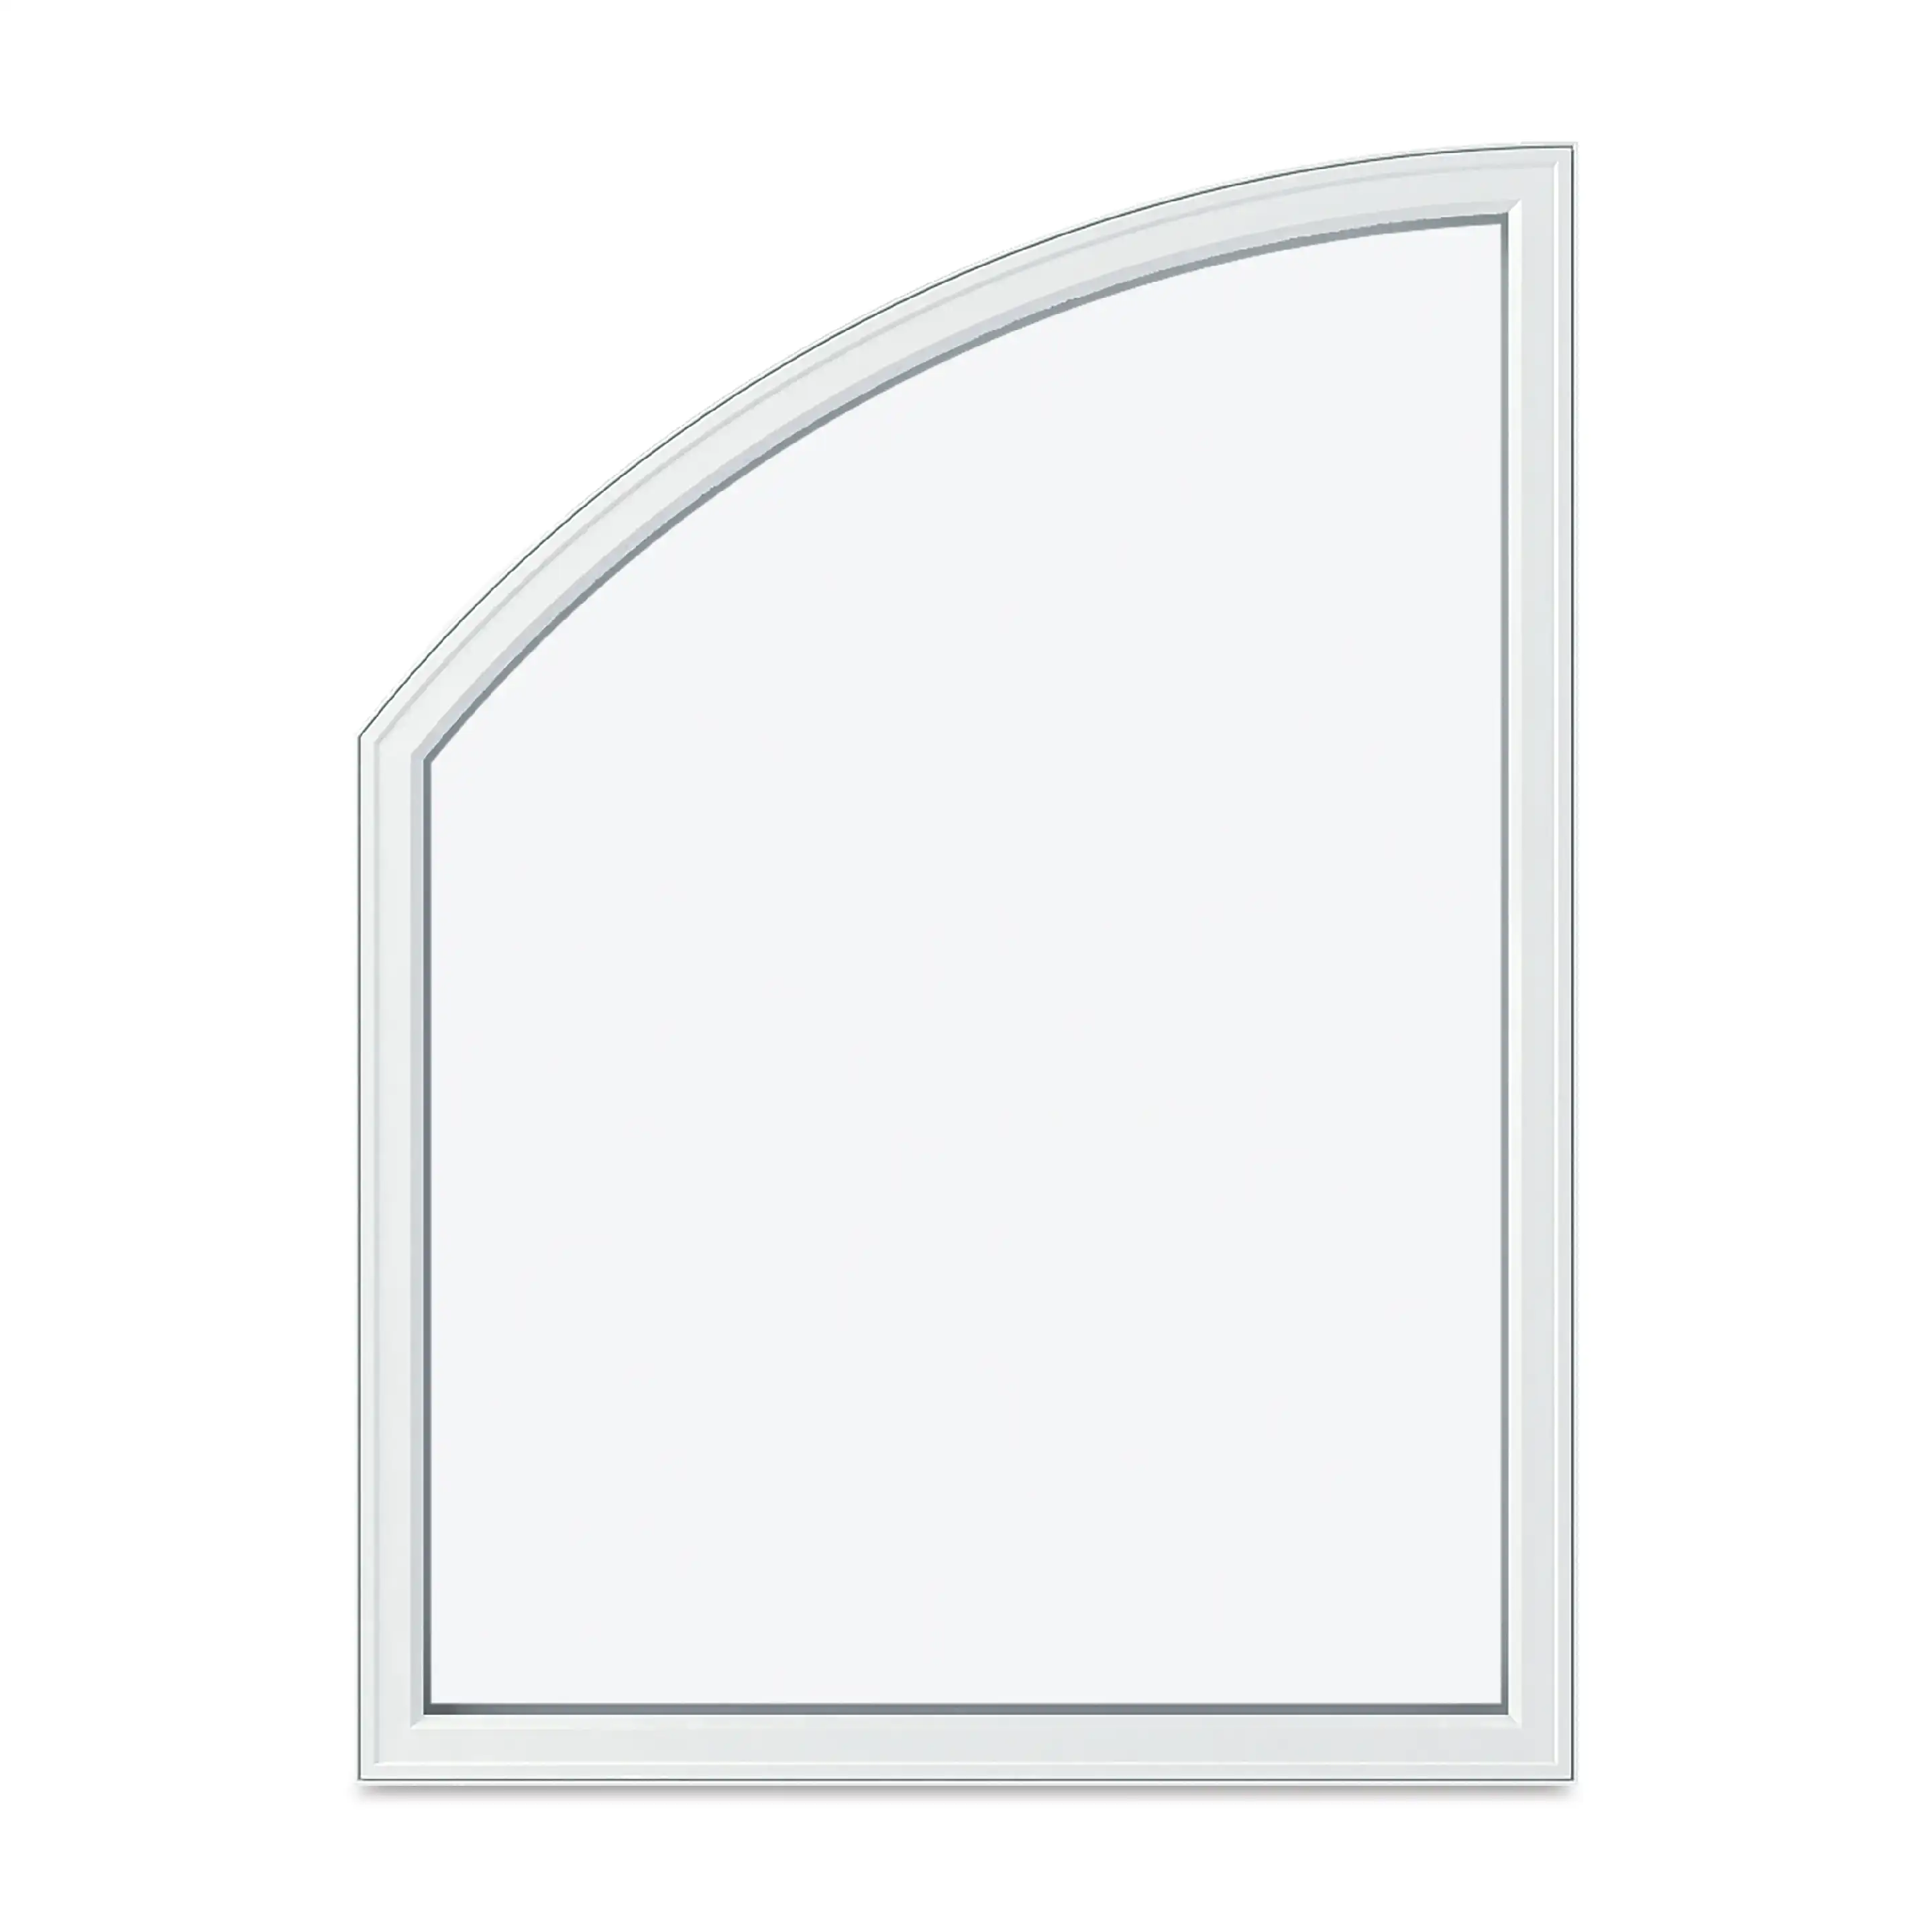 Image of a white Marvin Replacement arch window in a quarter eyebrow above springline style.